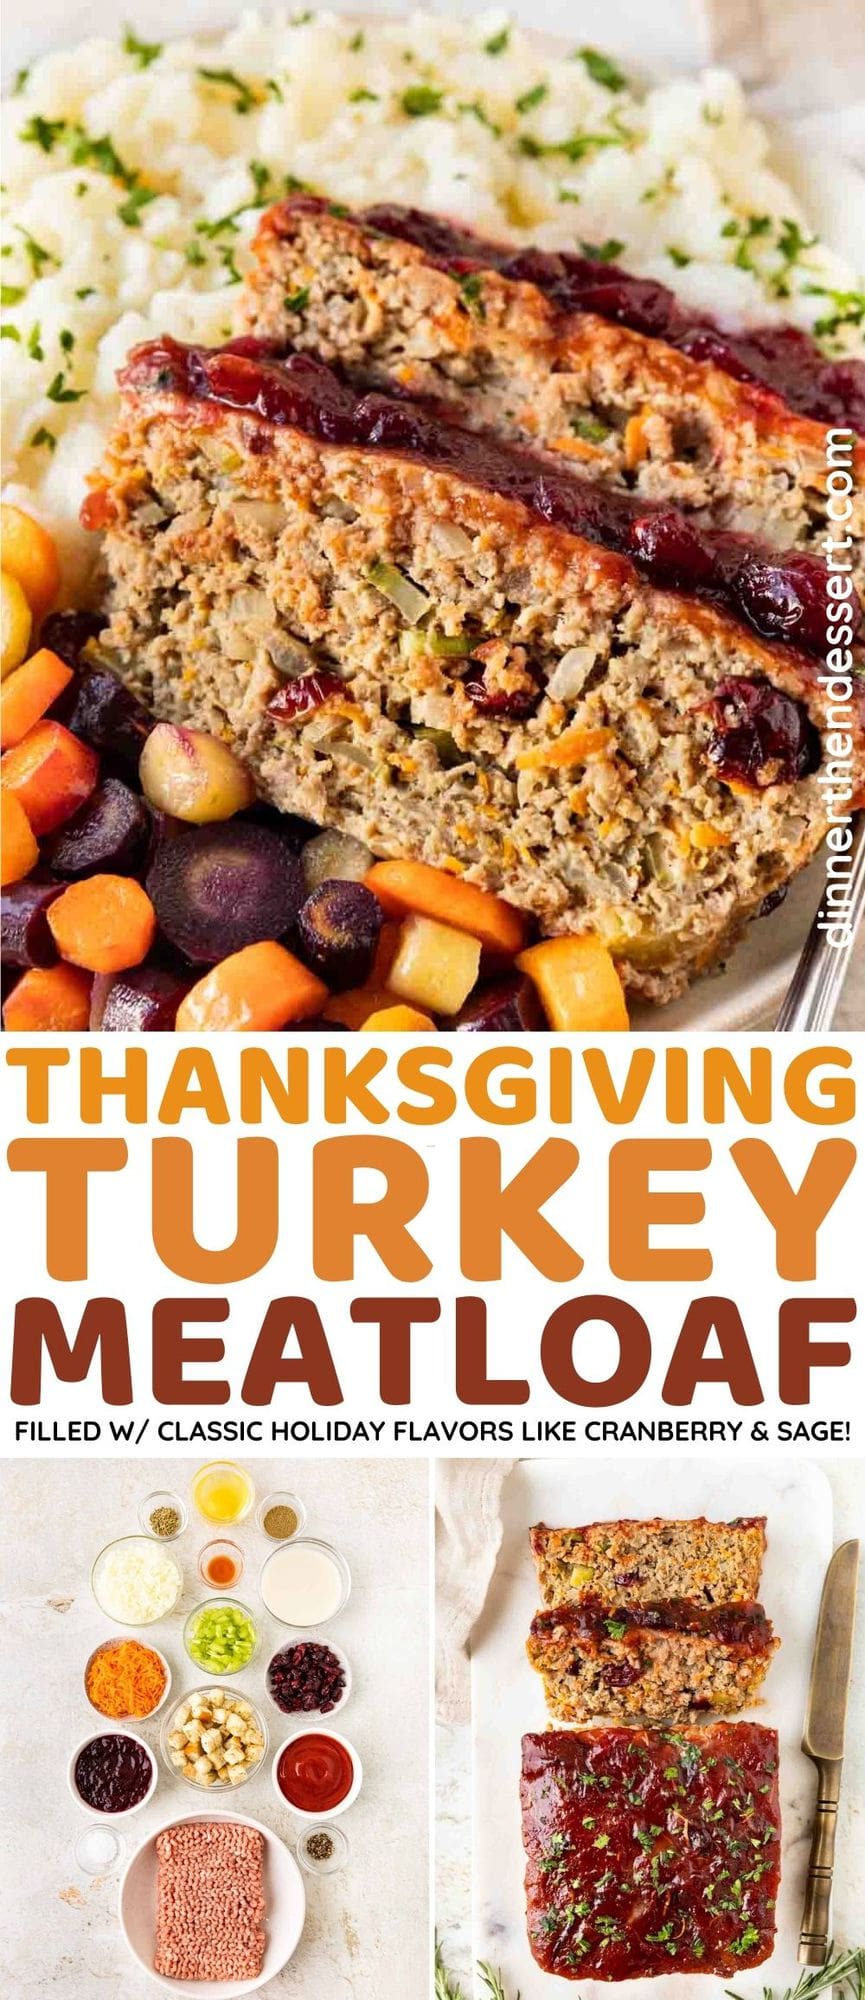 Thanksgiving Turkey Meatloaf slices in bowl with mashed potatoes and root vegetables and preparation collage